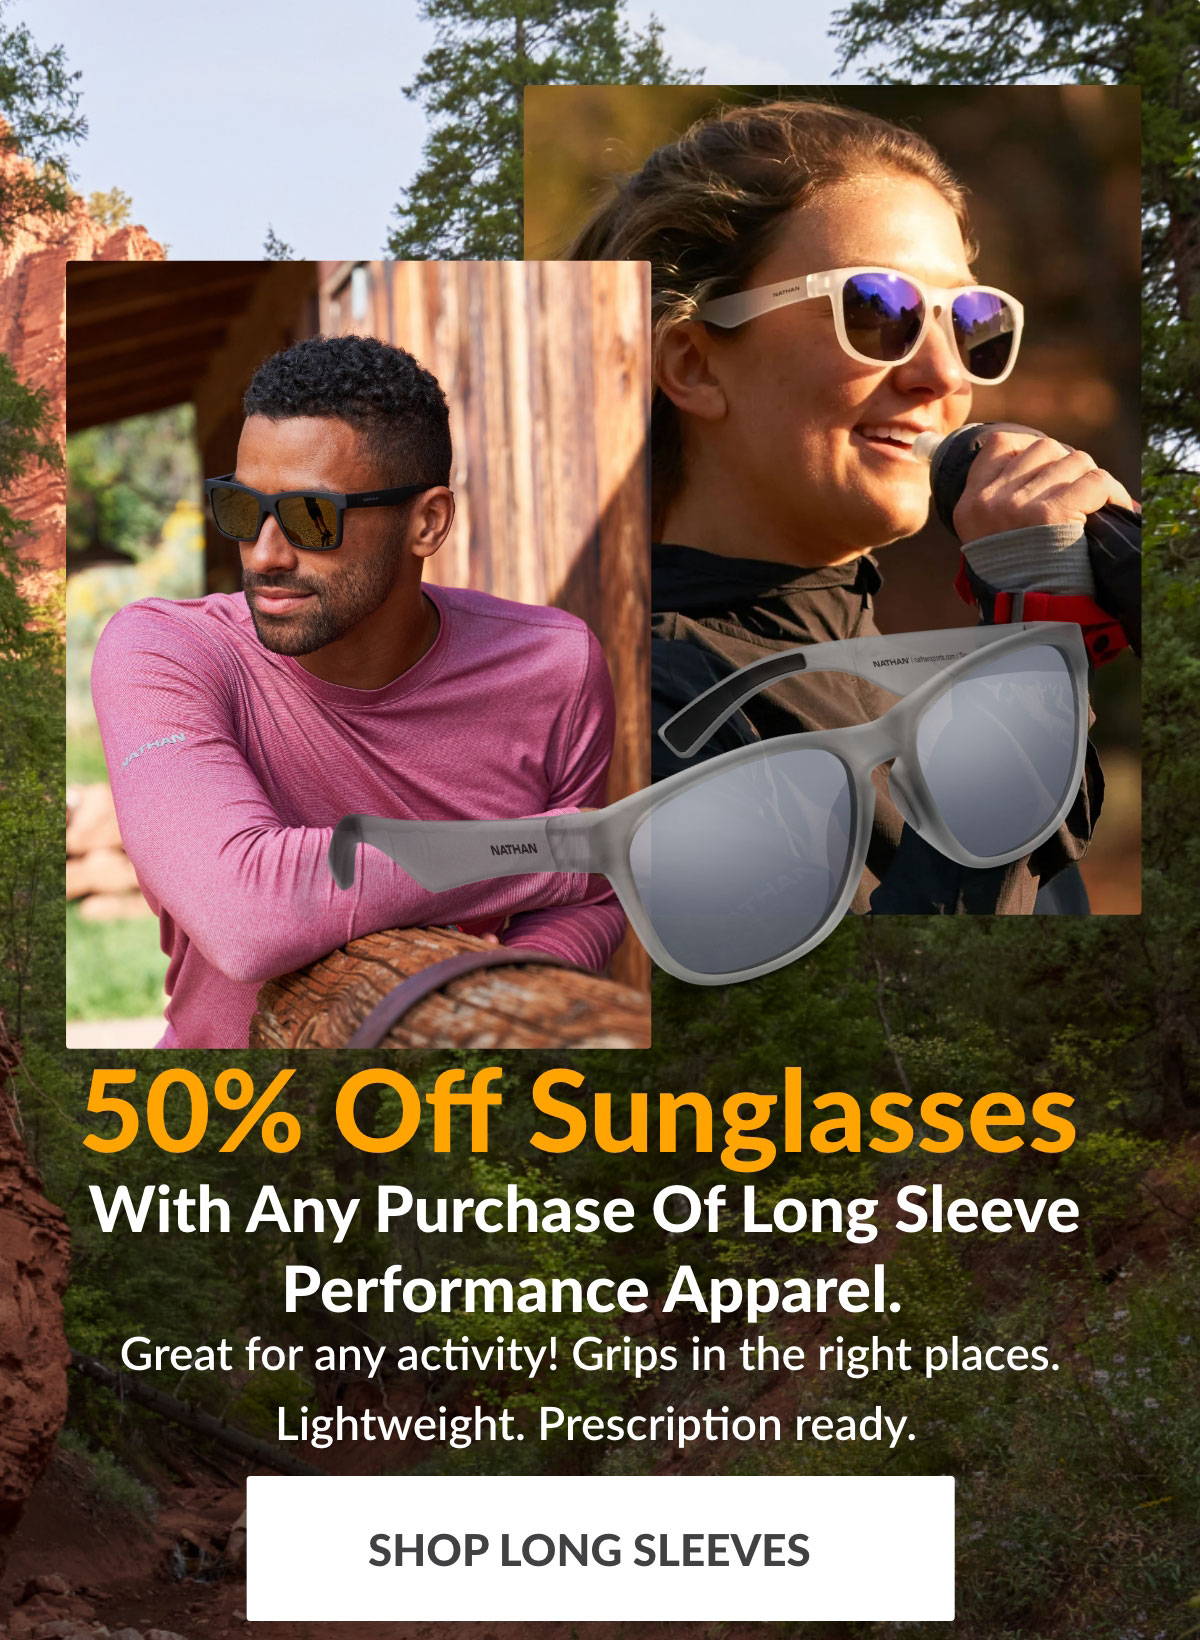 50% Off Sunglasses With Any Purchase Of Long Sleeve Performance Apparel. Great for any activity! Grips in the right places. Lightweight. Prescription ready. SHOP LONG SLEEVES